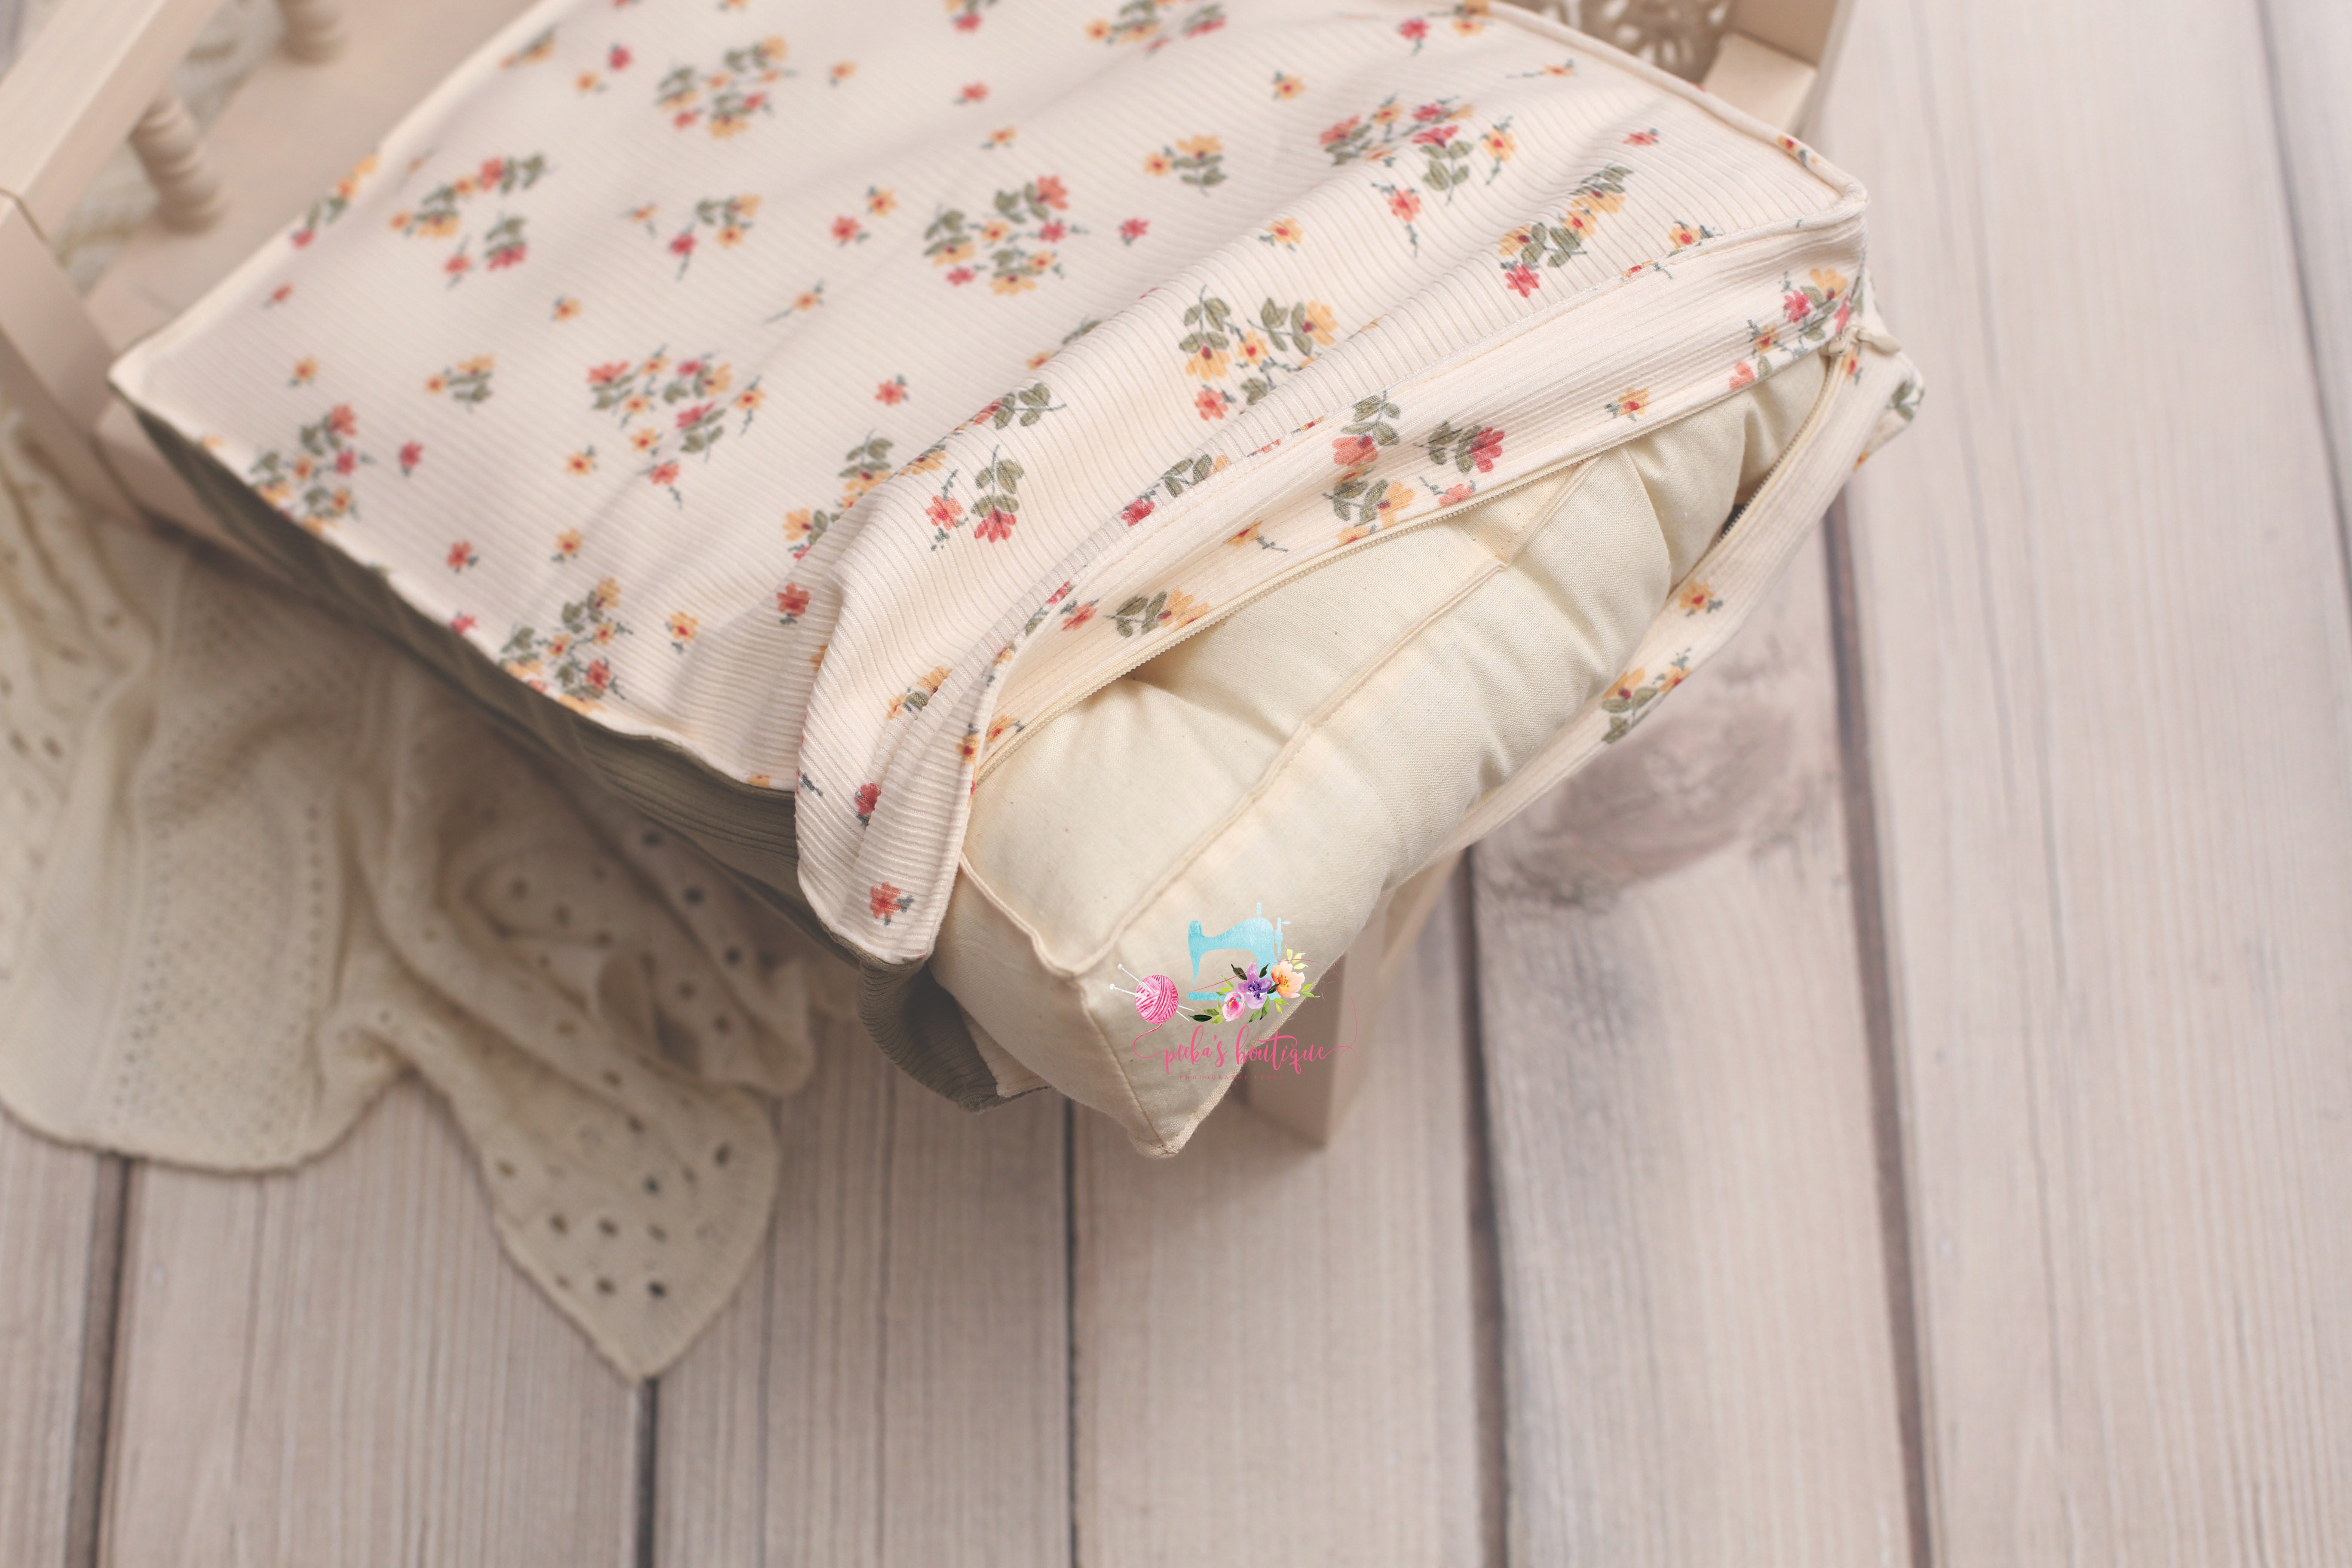 CUSTOM Newborn Mattress COVER- Three Sizes Available!- Made To Order!